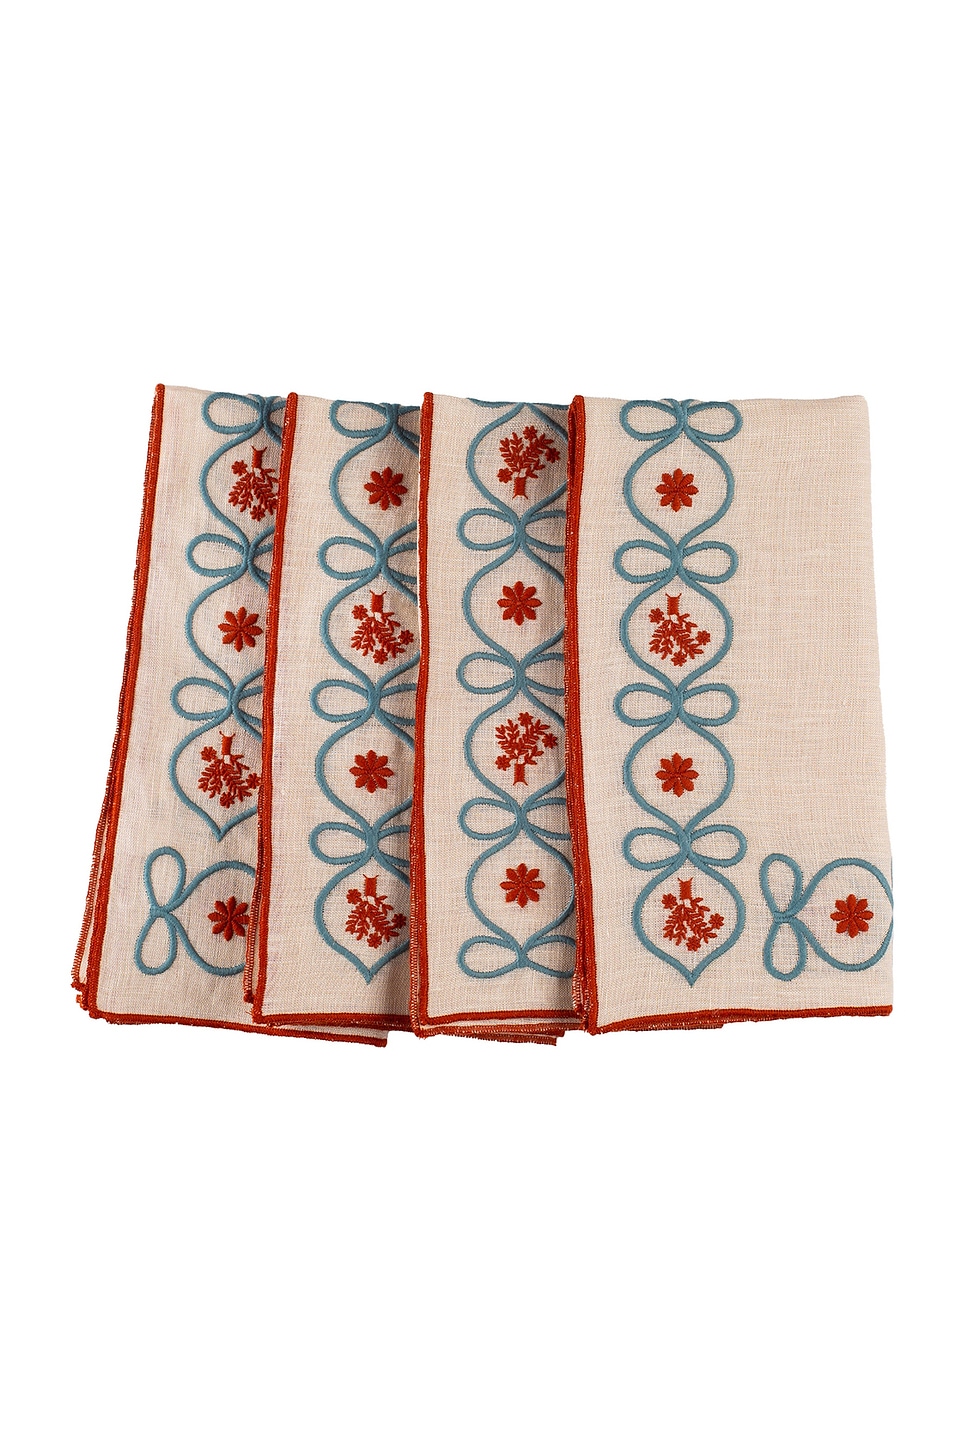 Image 1 of Misette Embroidered Linen Napkins Set Of 4 in Floral Red & Green